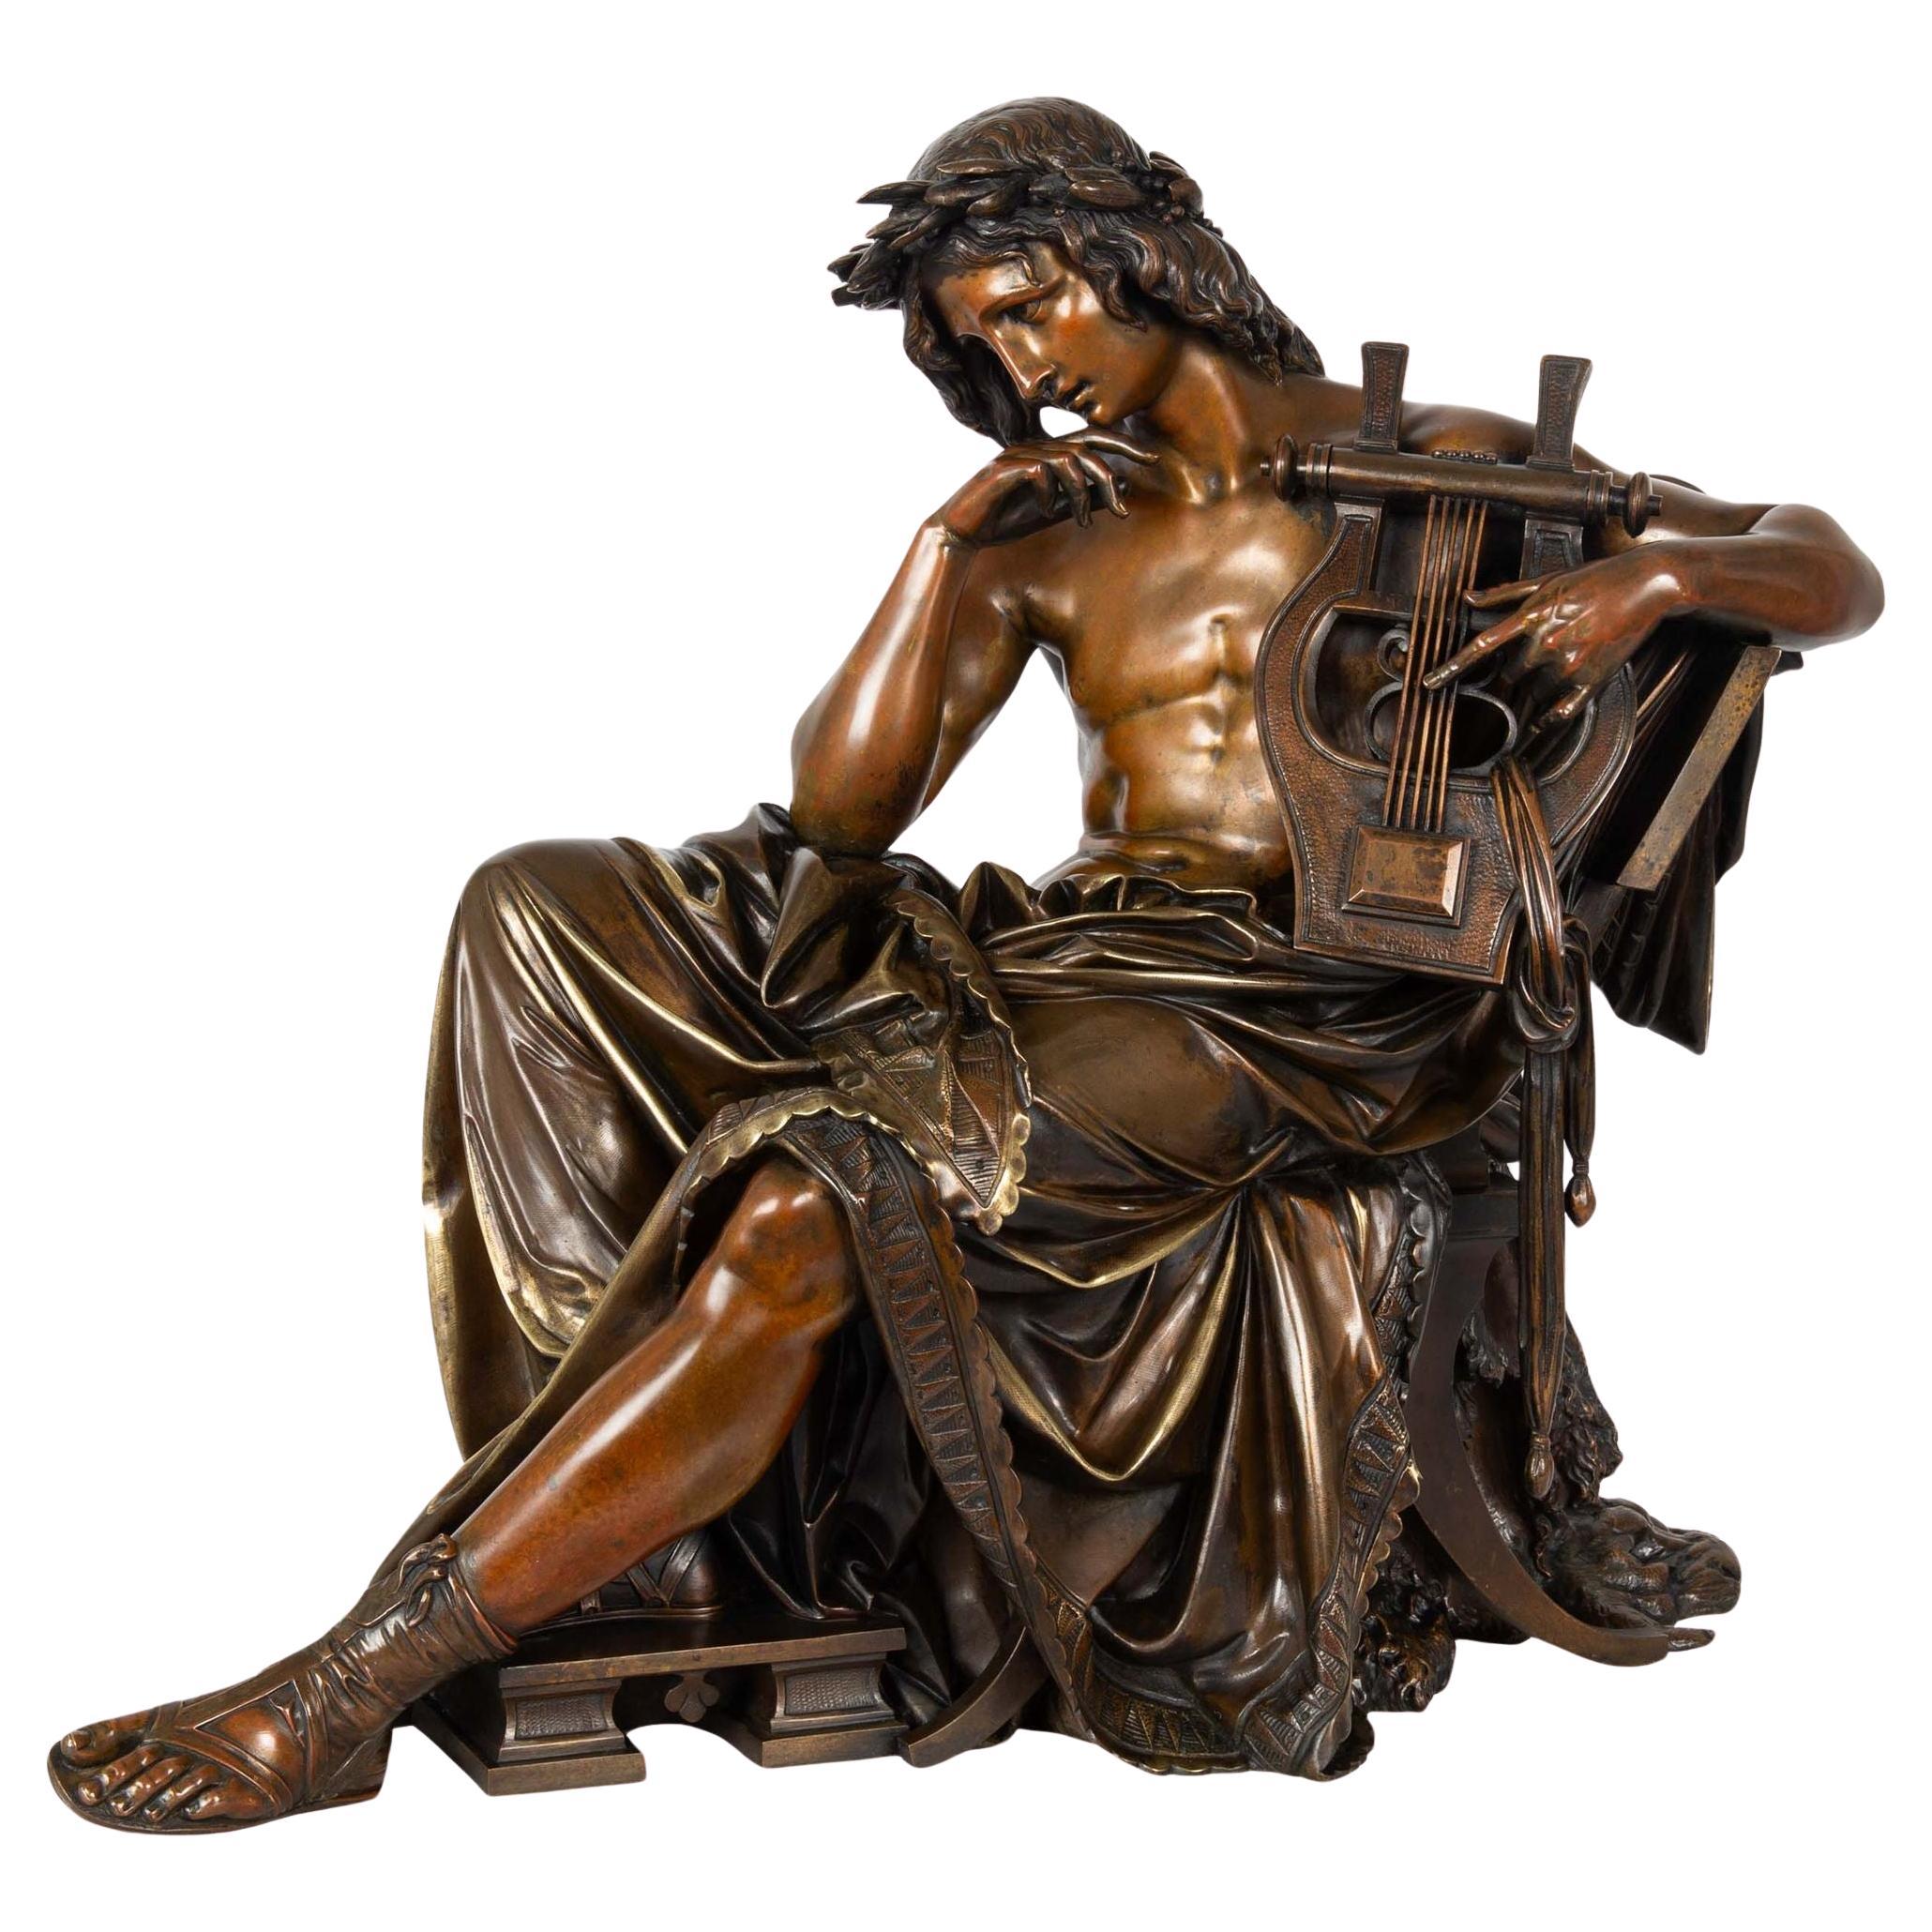 French Antique Bronze Sculpture of “Orpheus” by Albert Carrier-Belleuse